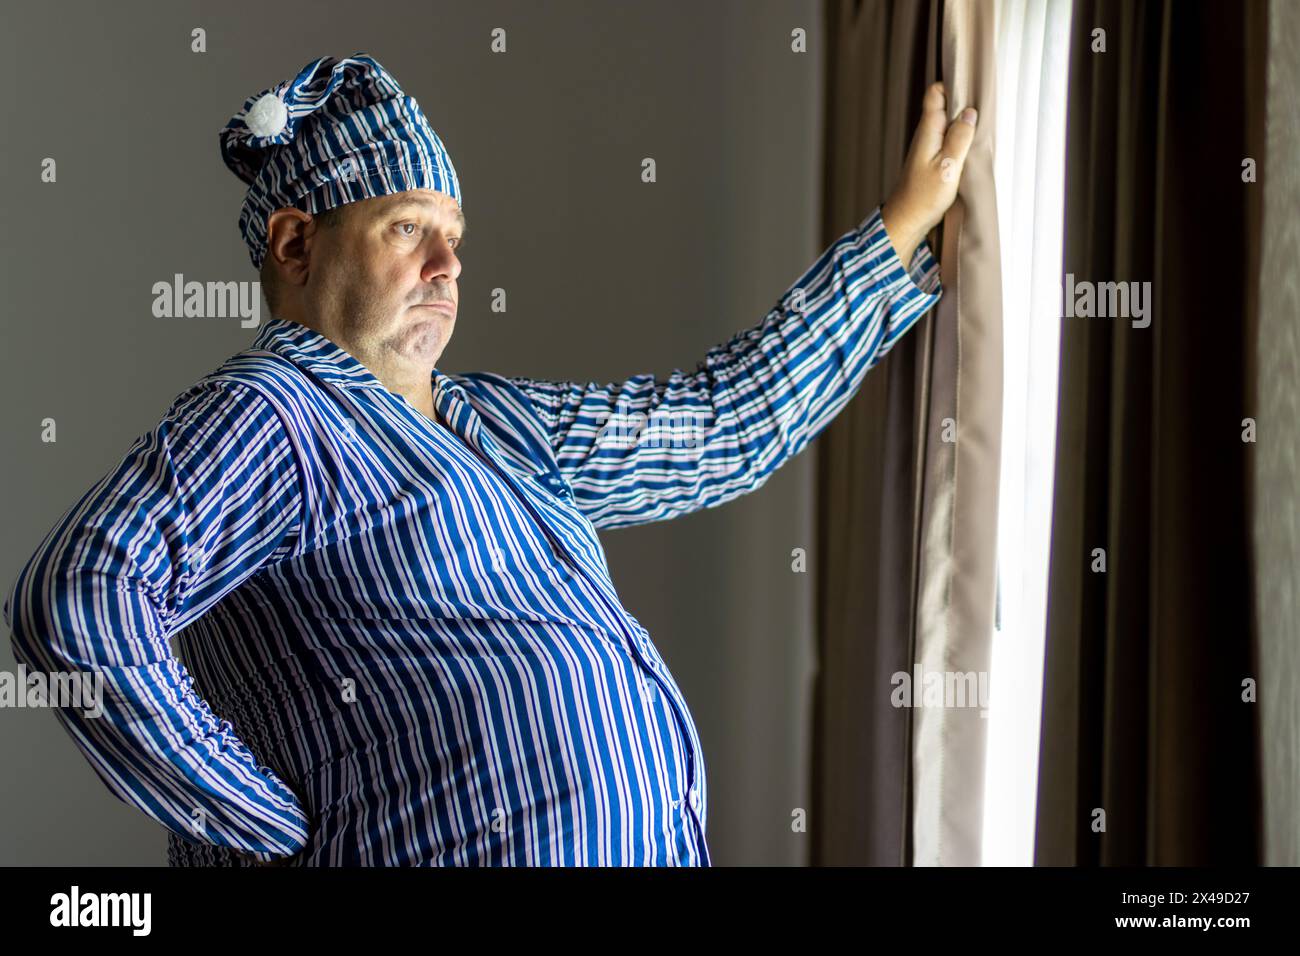 A fat man in striped pajamas looks out of a curtained window Stock Photo